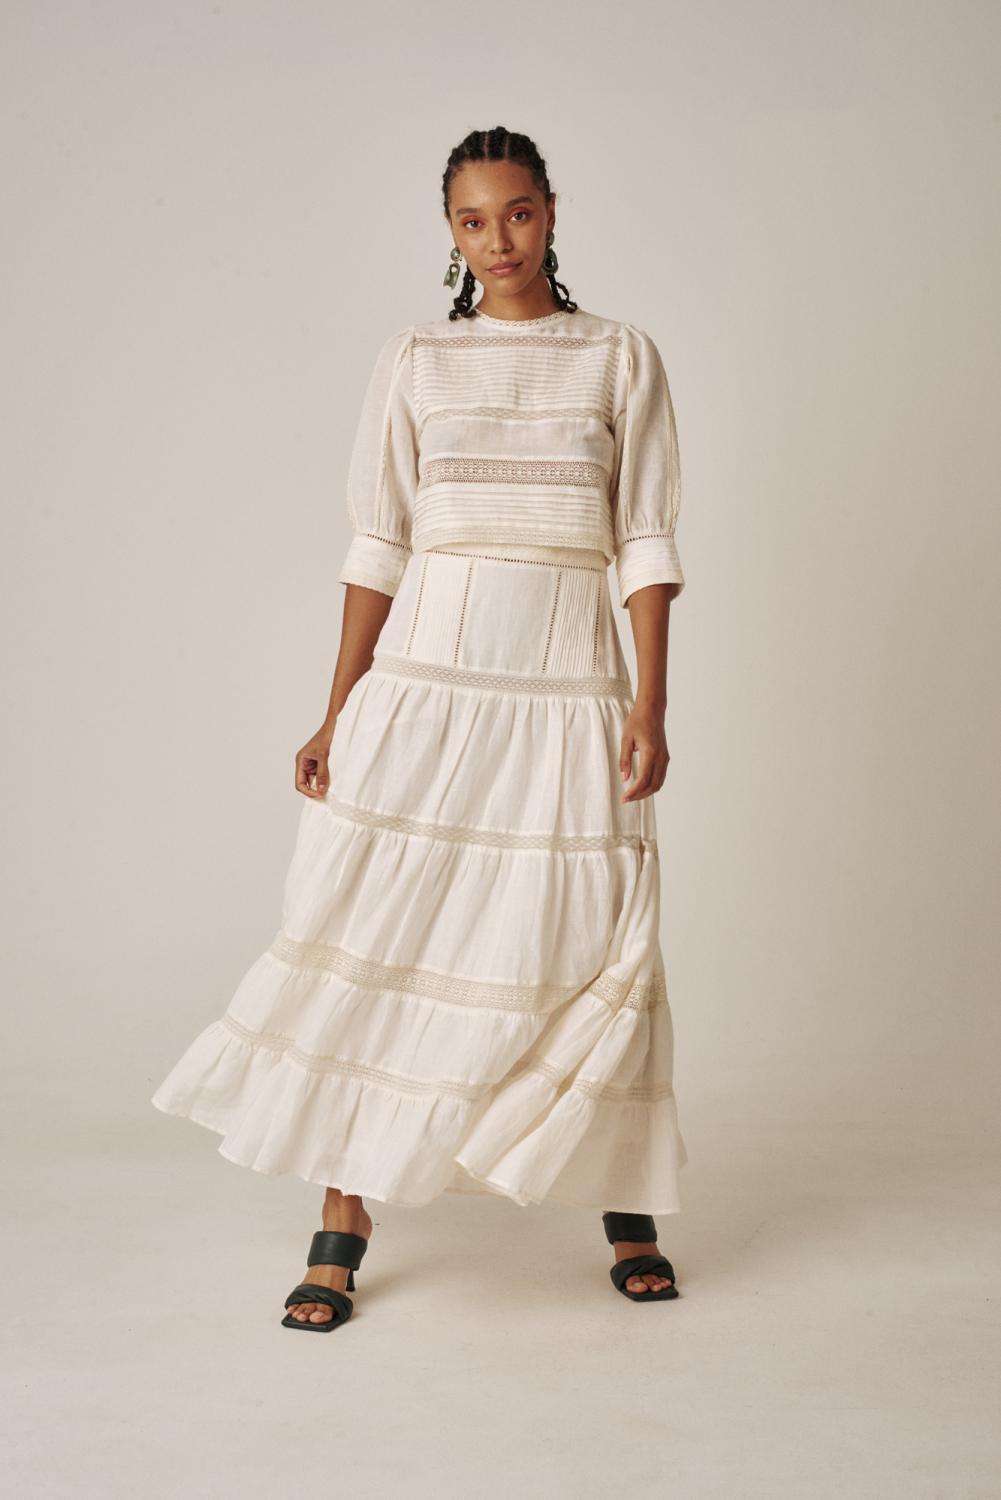 Carolina K Skirt: The Catalina Skirt from Carolina K has a high-waisted and banded waist. It is tiered with an invisible side seam zipper and straight hem. It is maxi length and flowy. 